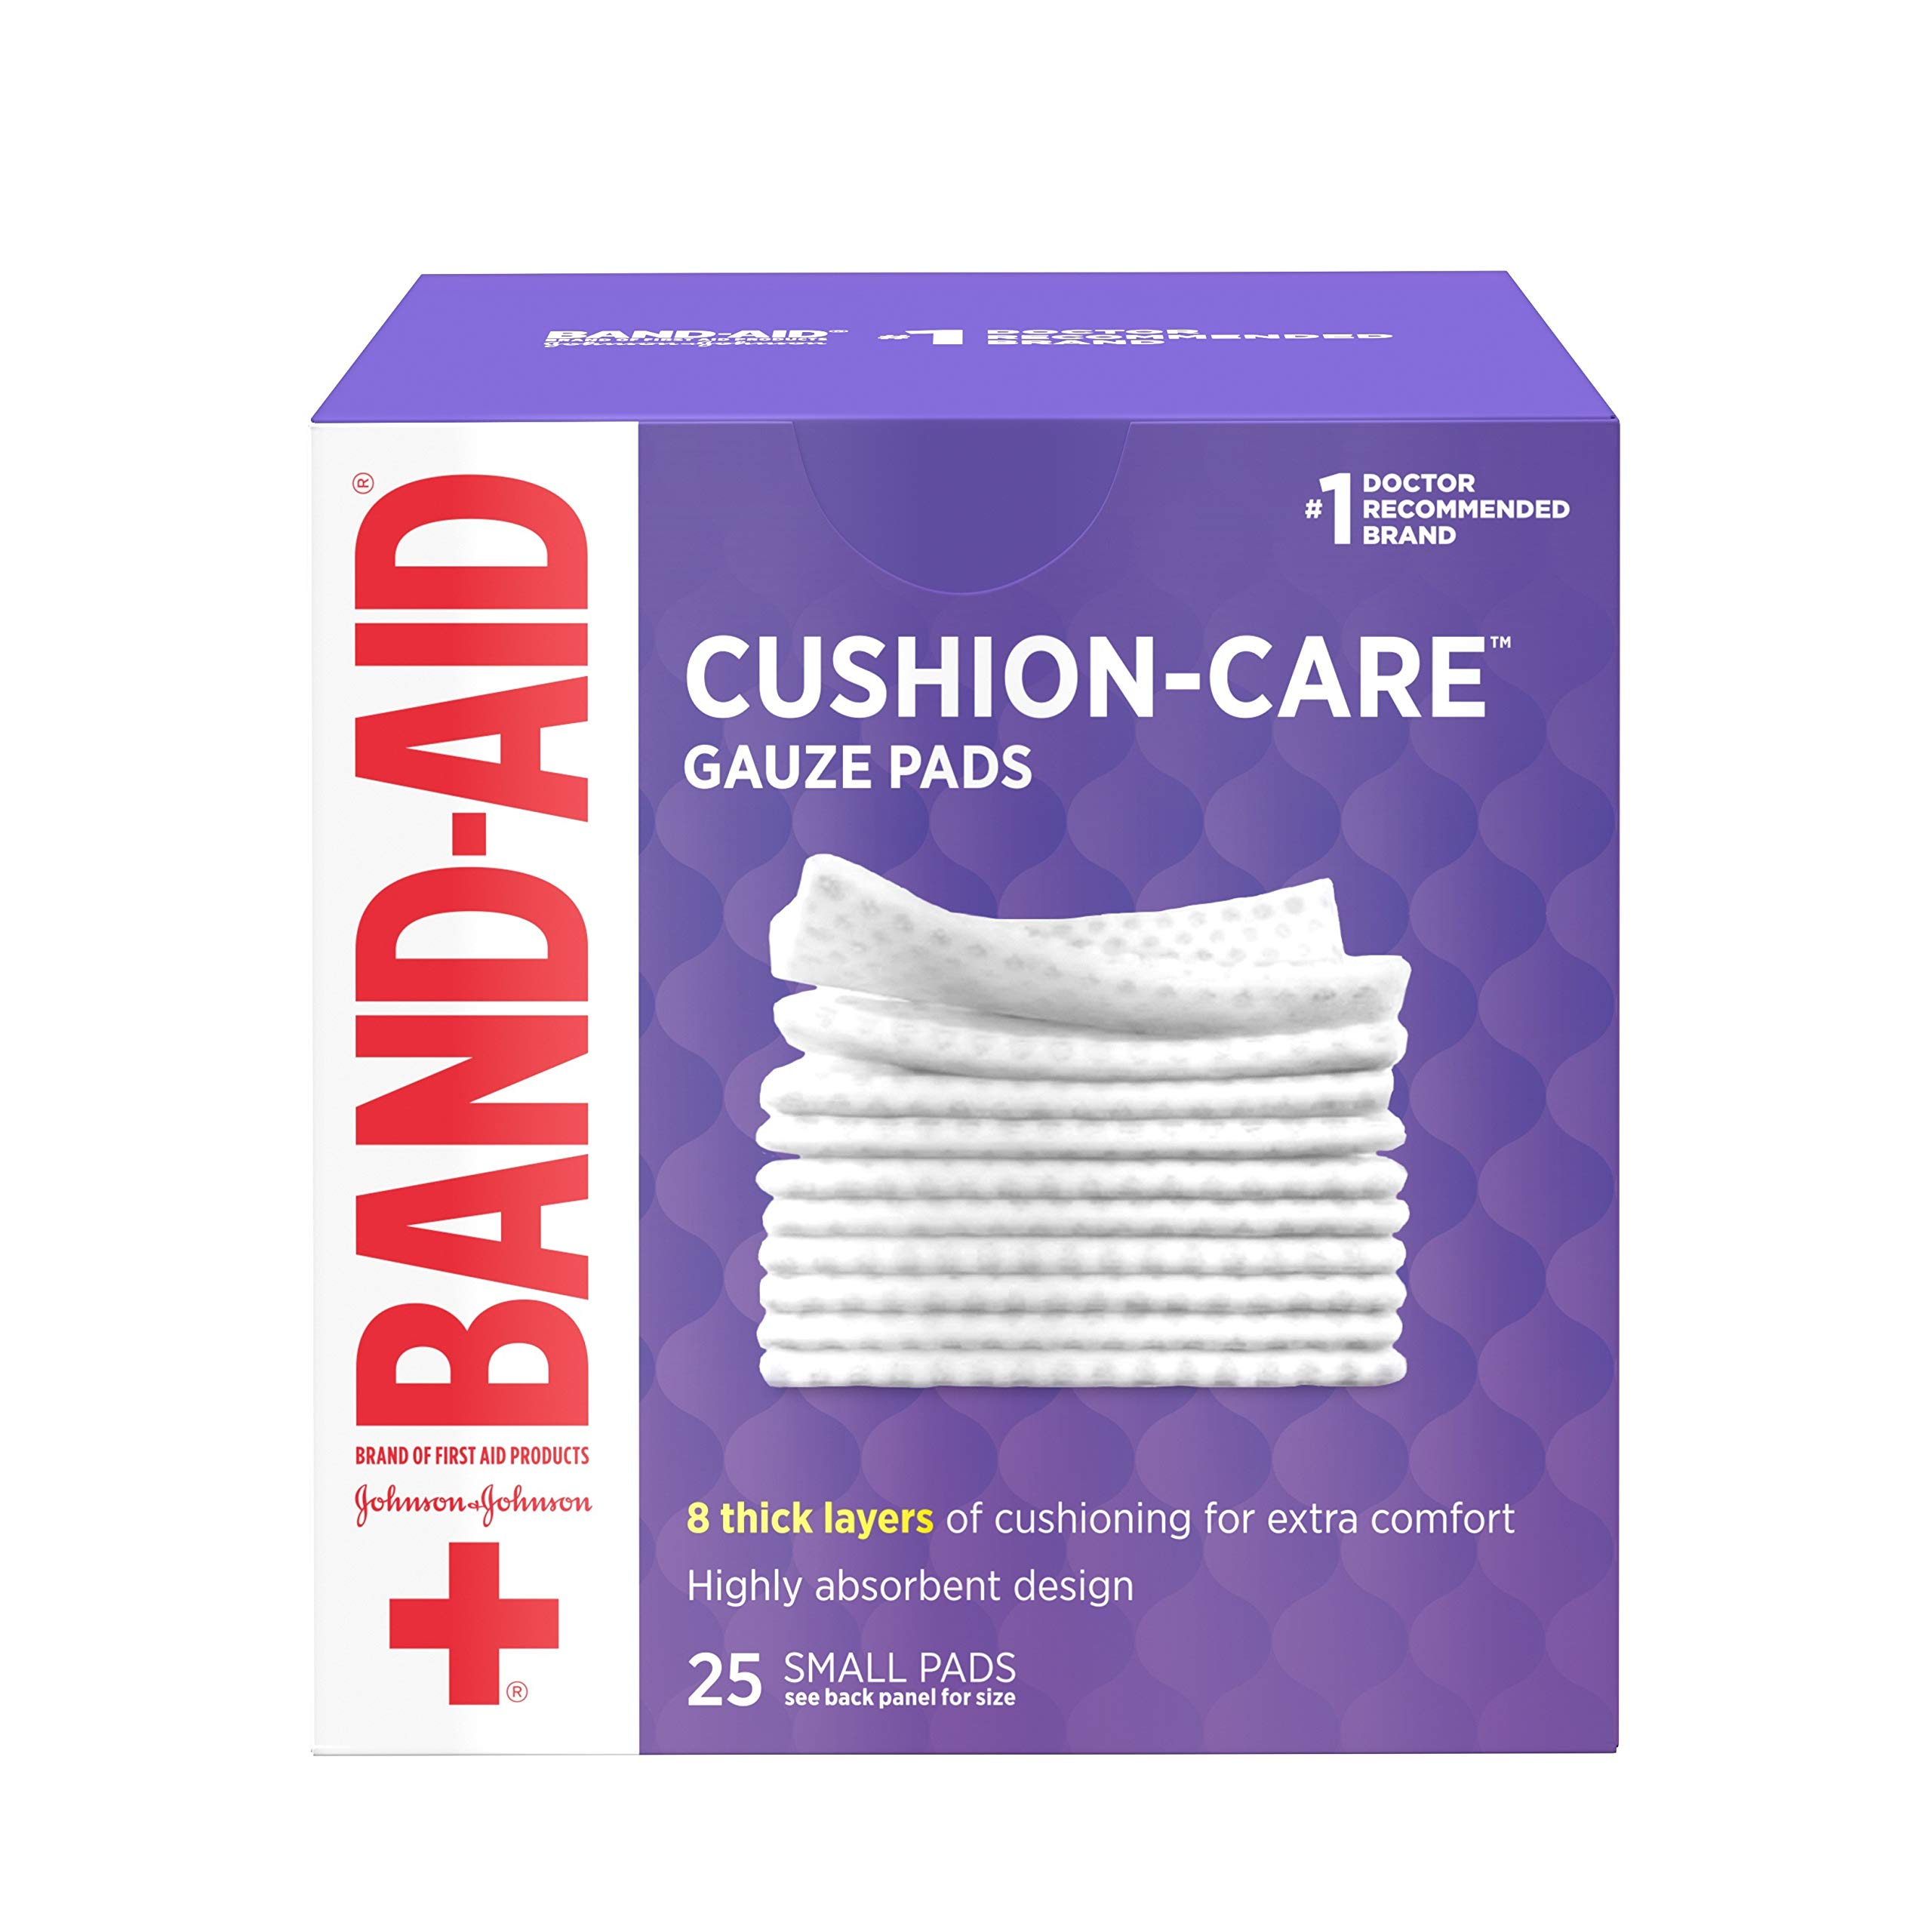 3 Packs of 25 Band-Aid Brand Cushion Care Non-Stick Gauze Pads, Sterile Individually-Wrapped (2 x 2") $7.05 + Free Shipping w/ Prime or on $35+